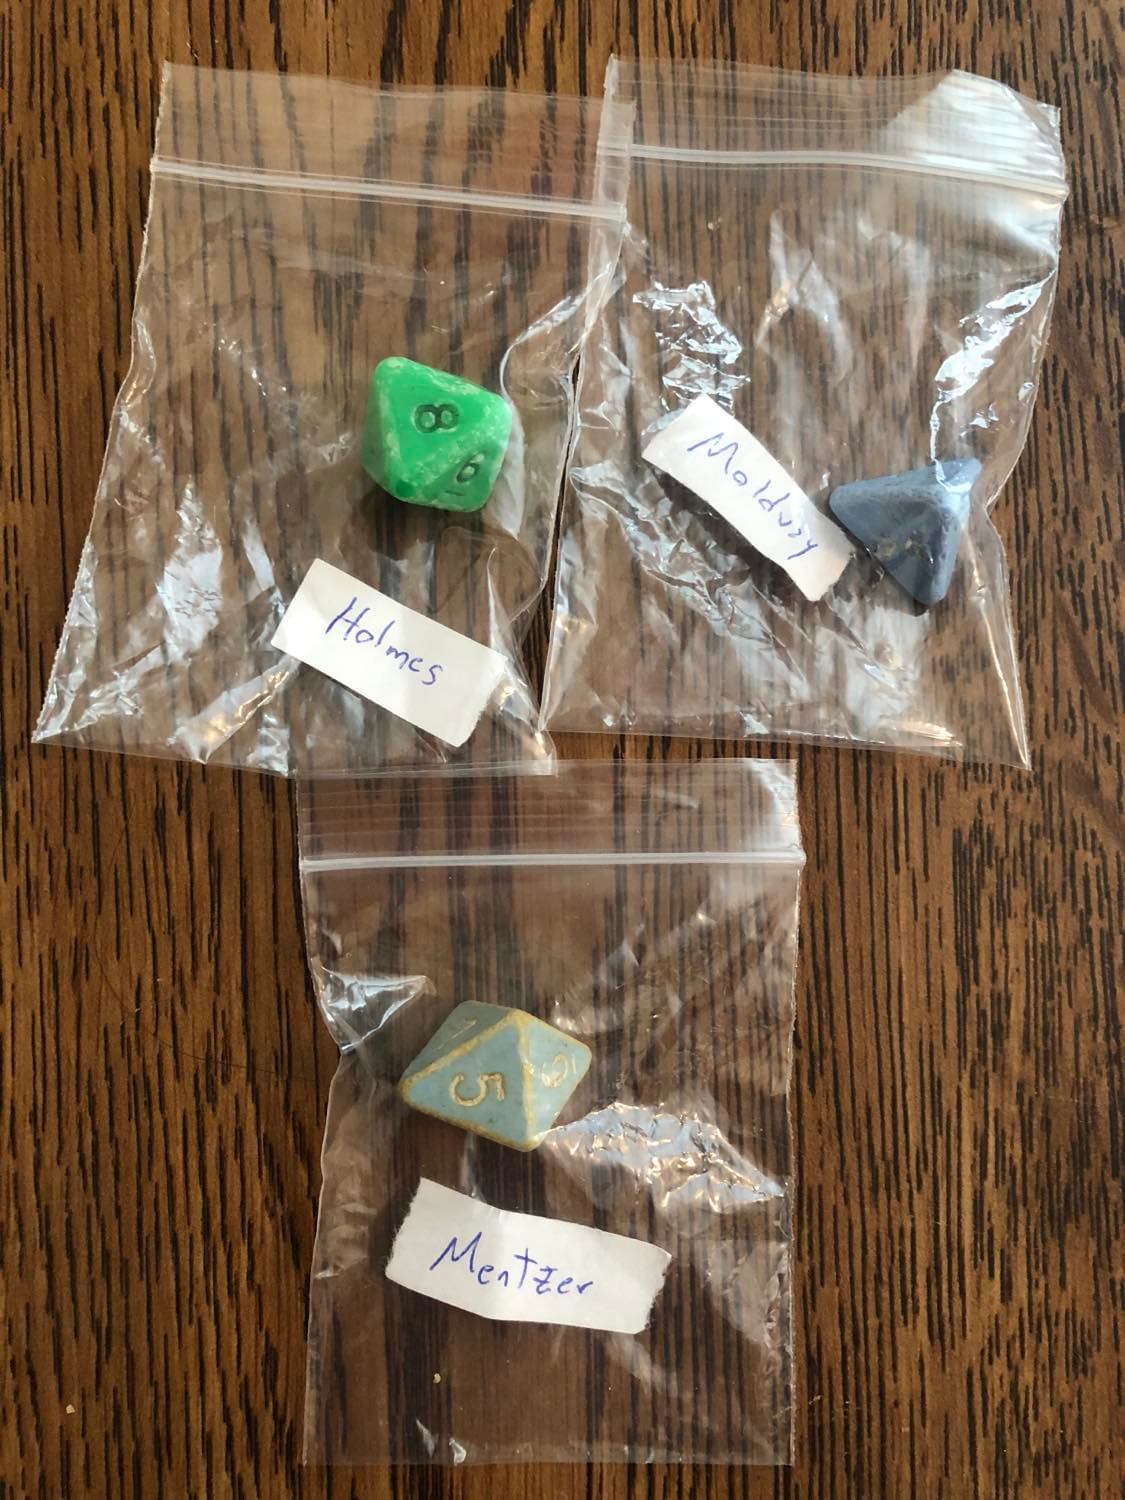 The original Holmes, Moldvay, and Mentzer dice inside separate ziplock bags, each one labelled. The Holmes is a heavily worn green d8 with black lettering, the Moldvay is a light blue d4 with white lettering, and the Mentzer is a slightly lighter blue d8 with white lettering, all sitting on a wooden table surface.